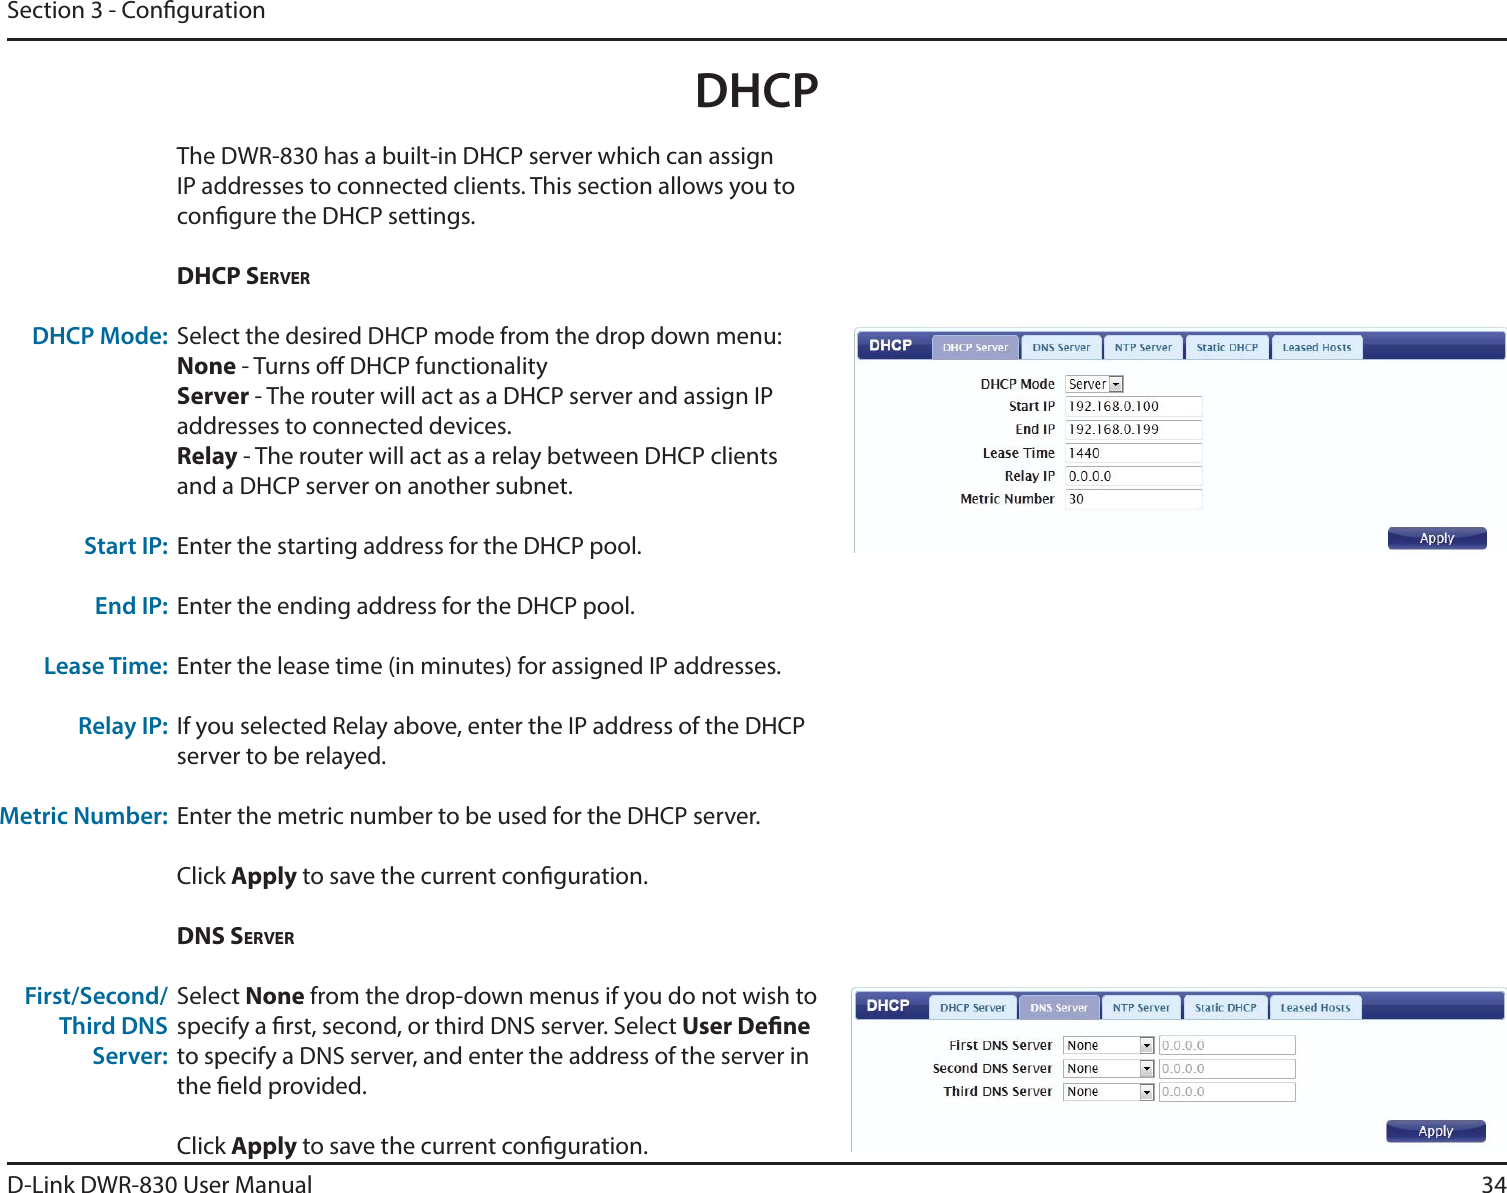 D-Link DWR-830 User ManualThe DWR-830 has a built-in DHCP server which can assign 34Section 3 - CongurationDHCPIP addresses to connected clients. This section allows you to congure the DHCP settings. DHCP SERVERSelect the desired DHCP mode from the drop down menu:None - Turns o DHCP functionalityServer - The router will act as a DHCP server and assign IP addresses to connected devices.Relay - The router will act as a relay between DHCP clients and a DHCP server on another subnet. Enter the starting address for the DHCP pool.Enter the ending address for the DHCP pool.Enter the lease time (in minutes) for assigned IP addresses. If you selected Relay above, enter the IP address of the DHCP server to be relayed.Enter the metric number to be used for the DHCP server.Click Apply to save the current conguration. DNS SERVERSelect None from the drop-down menus if you do not wish to specify a rst, second, or third DNS server. Select User Dene to specify a DNS server, and enter the address of the server in the eld provided. Click Apply to save the current conguration. DHCP Mode:Start IP:End IP:Lease Time:Relay IP:Metric Number:First/Second/Third DNS Server: